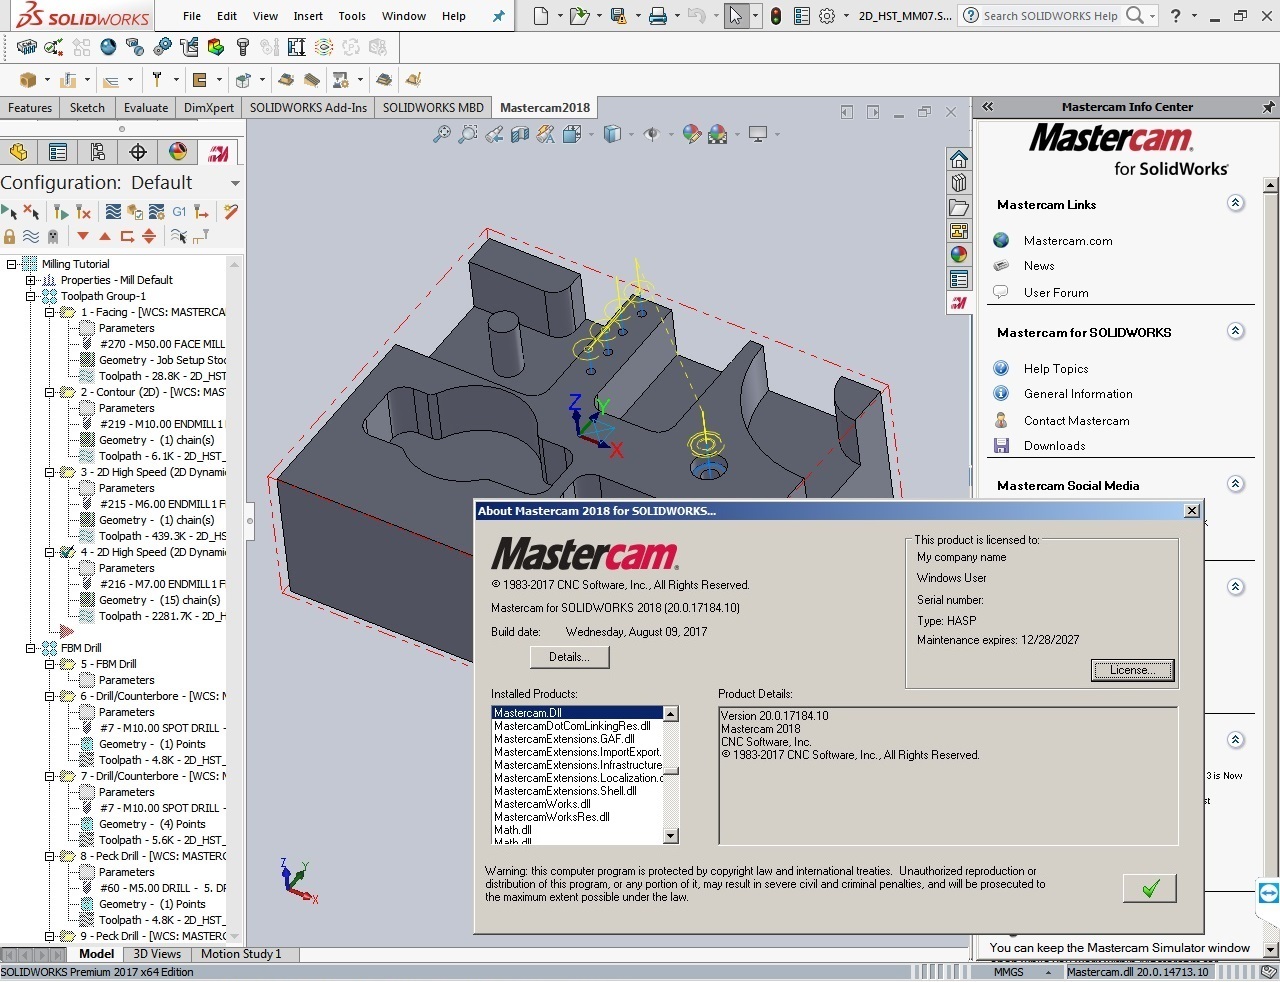 Programming with Mastercam for SolidWorks 2018 Build 20.0.17184.10 full license